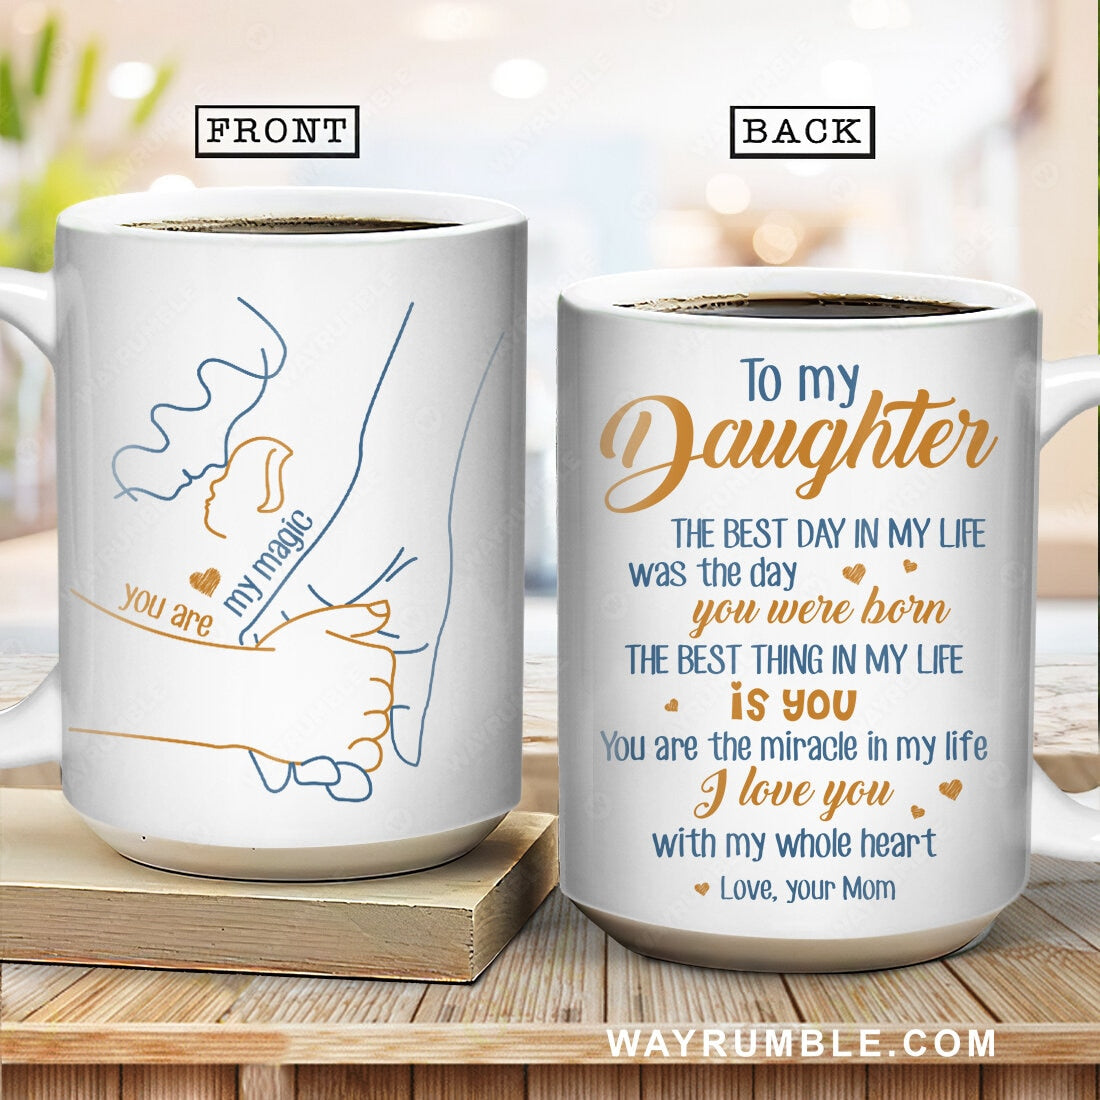 Mom to daughter, Hand in hand, Cute heart, The best thing in my life is you - Family White Mug